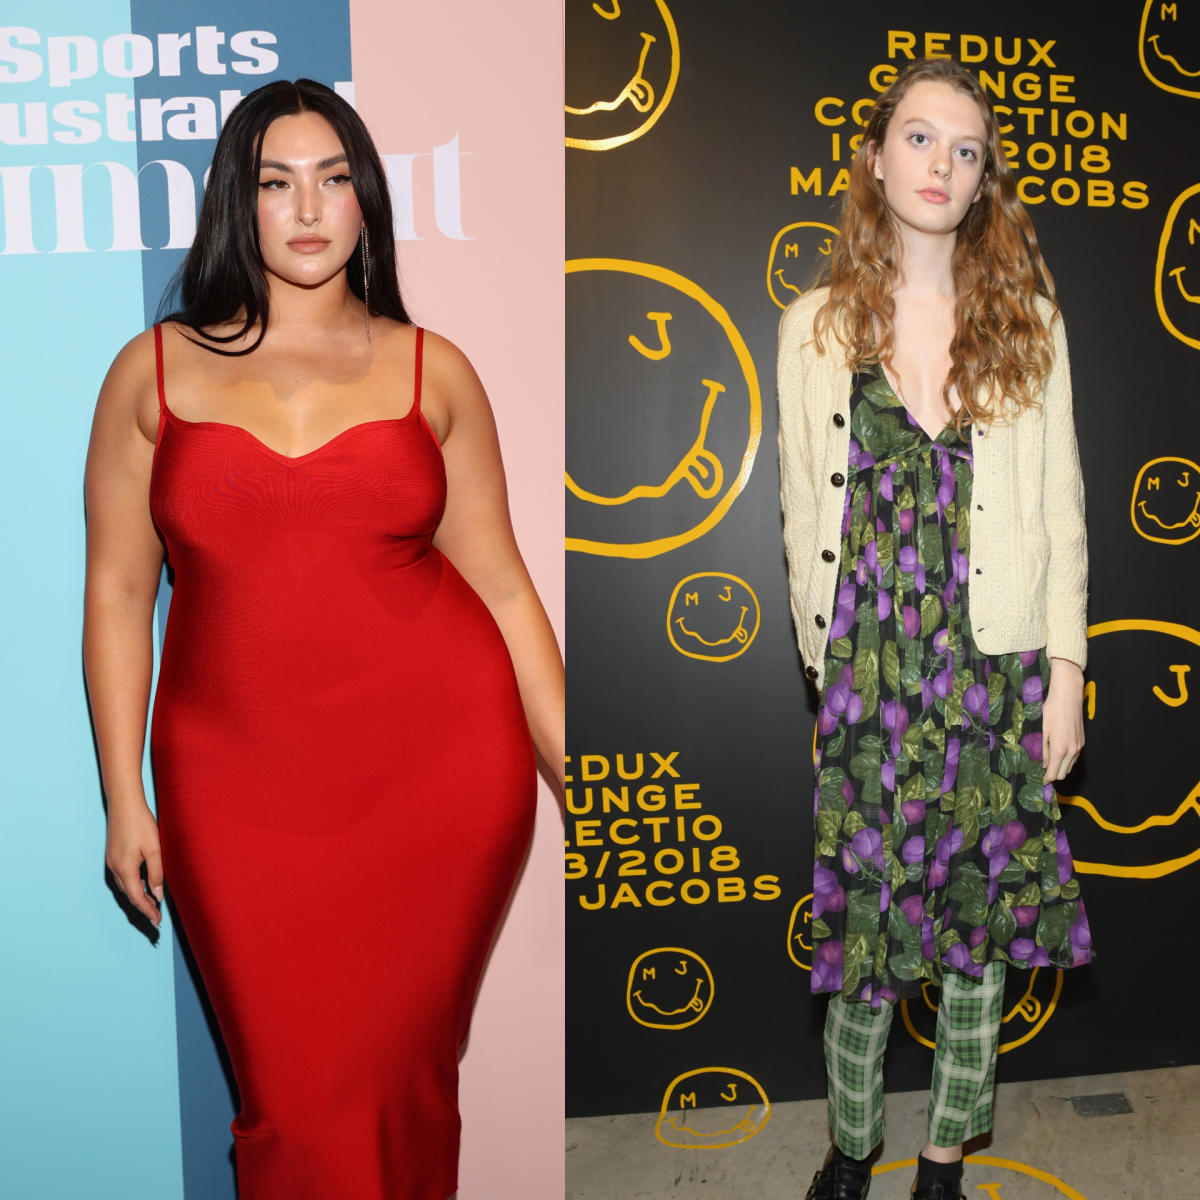 Plus-Size Models Are Changing Perceptions of Beauty - el Don News